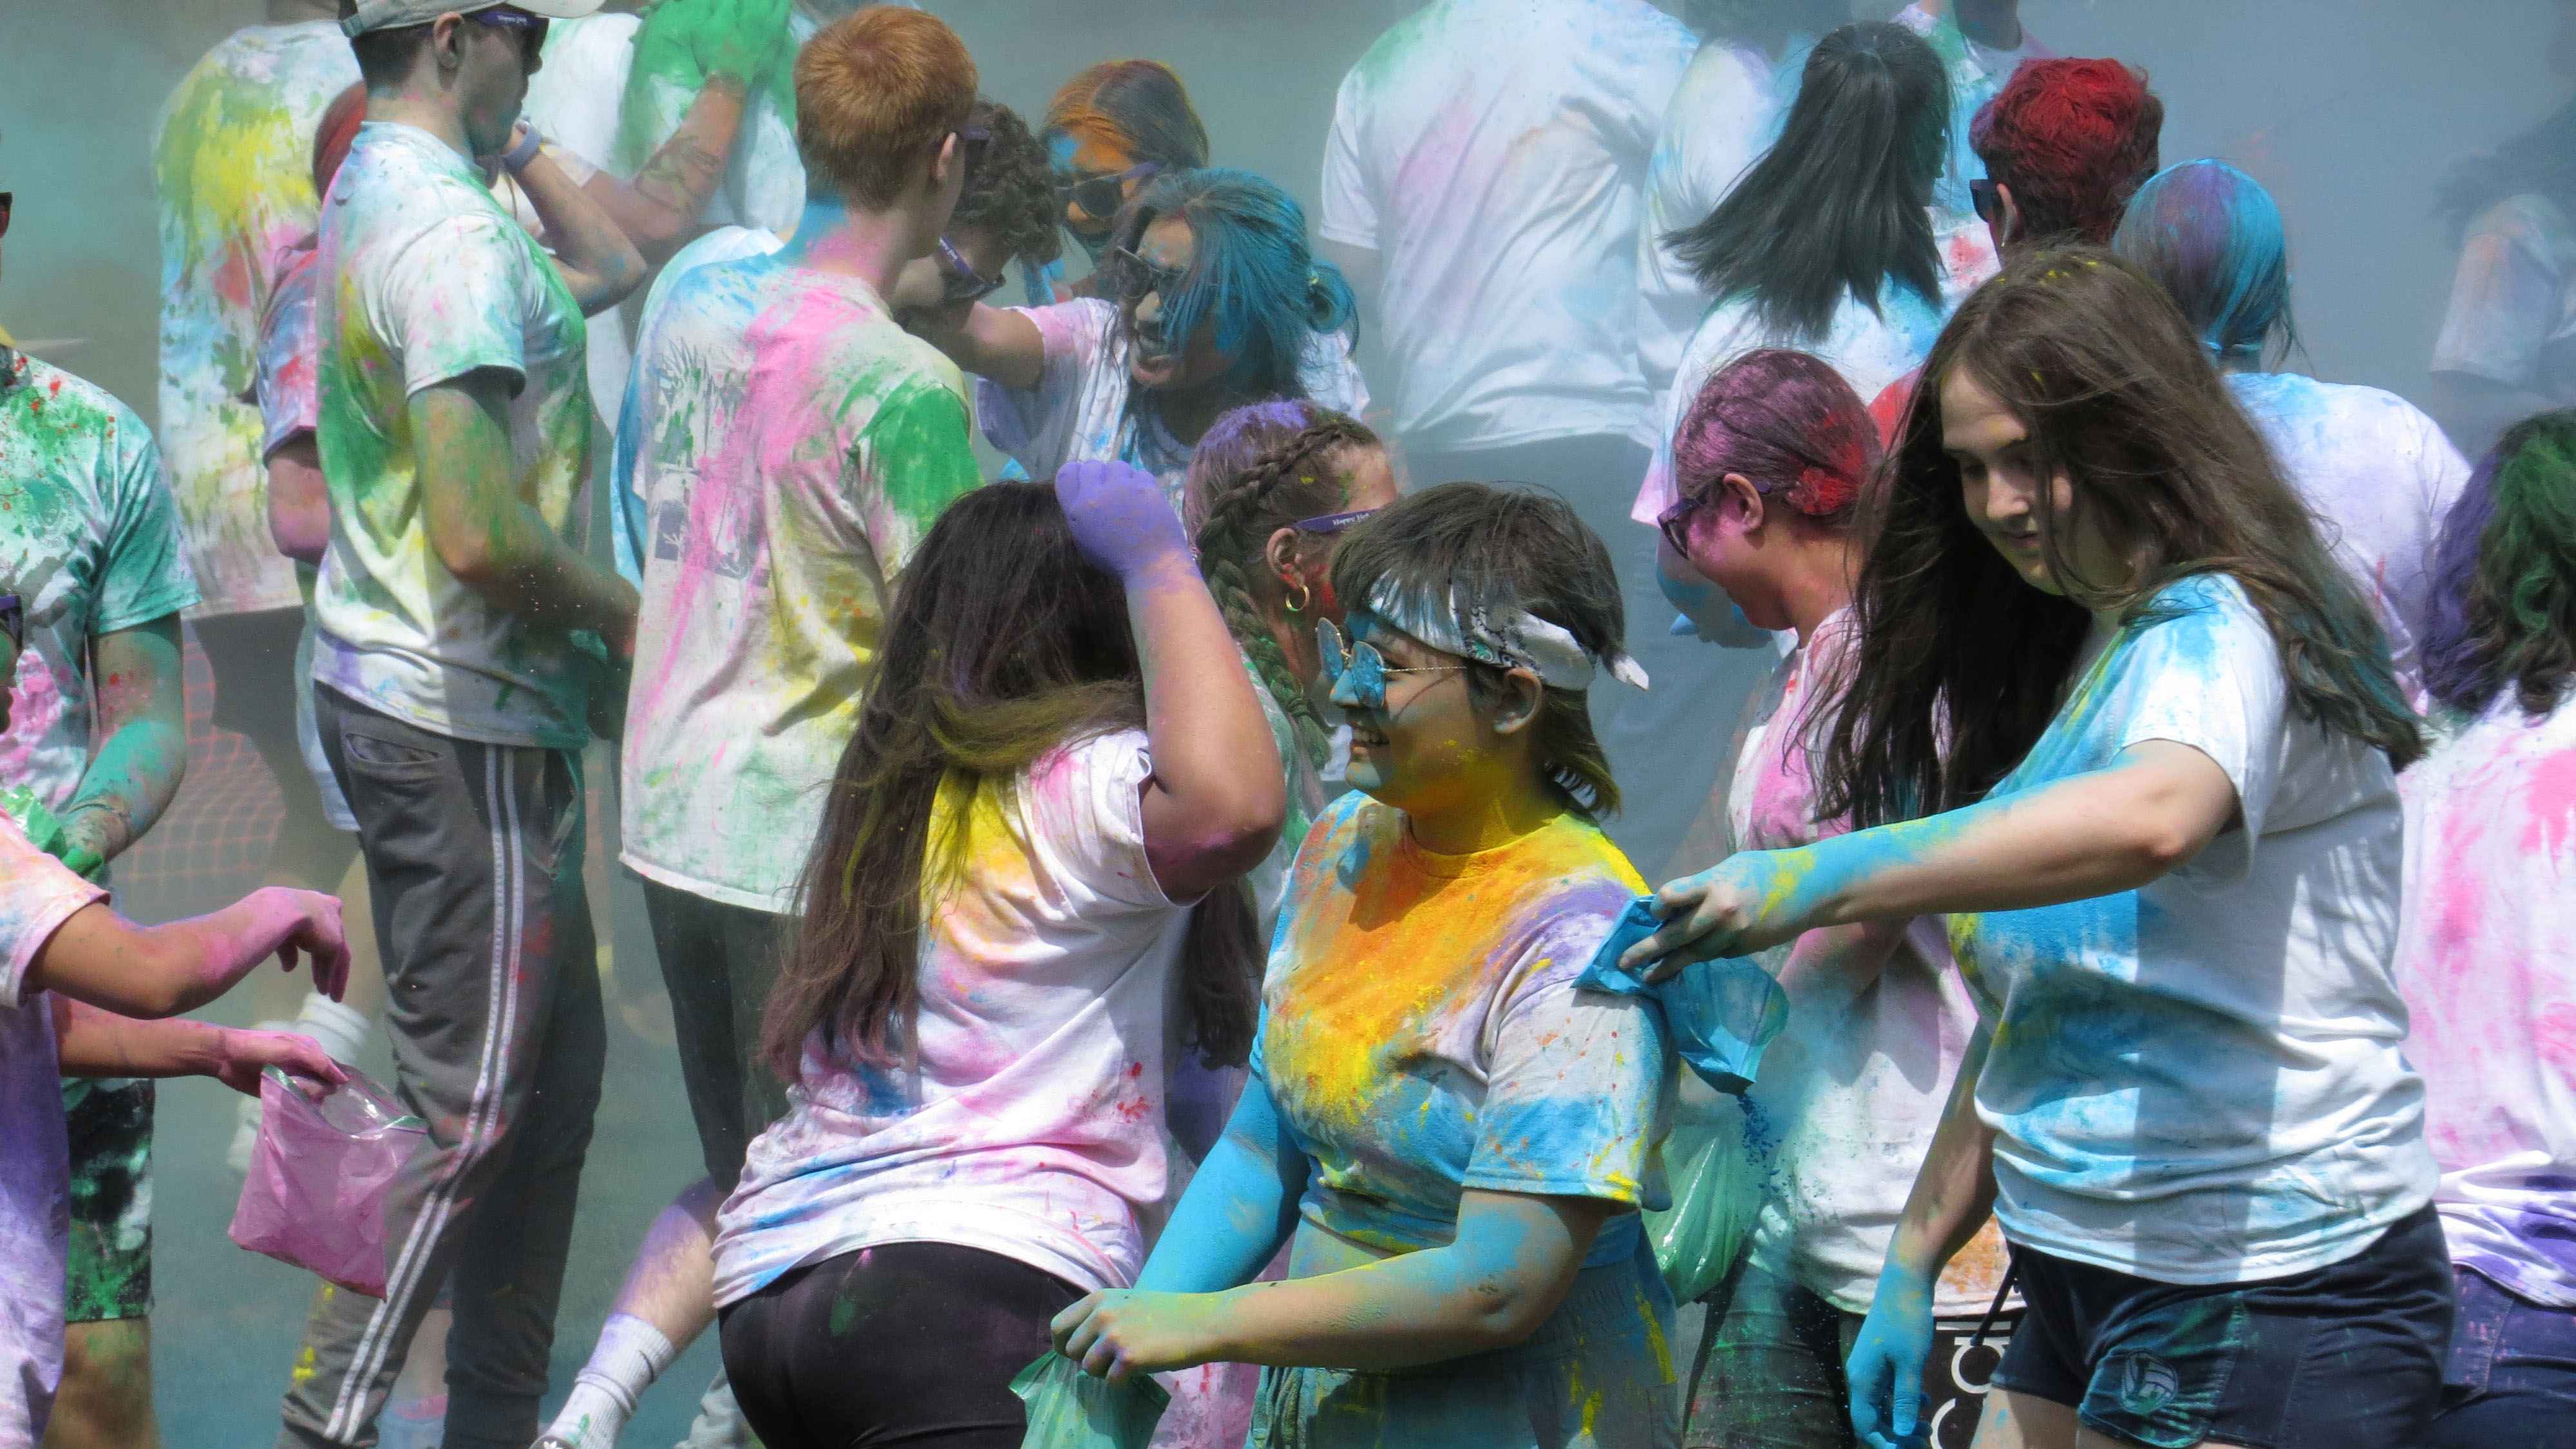 About 150 people attended the April 22 Holi Festival of Colors, shown, hosted on the Dionne Green by The University of Scranton Asia Club, according to Kapil Patel ‘25, social media coordinator for the group. 